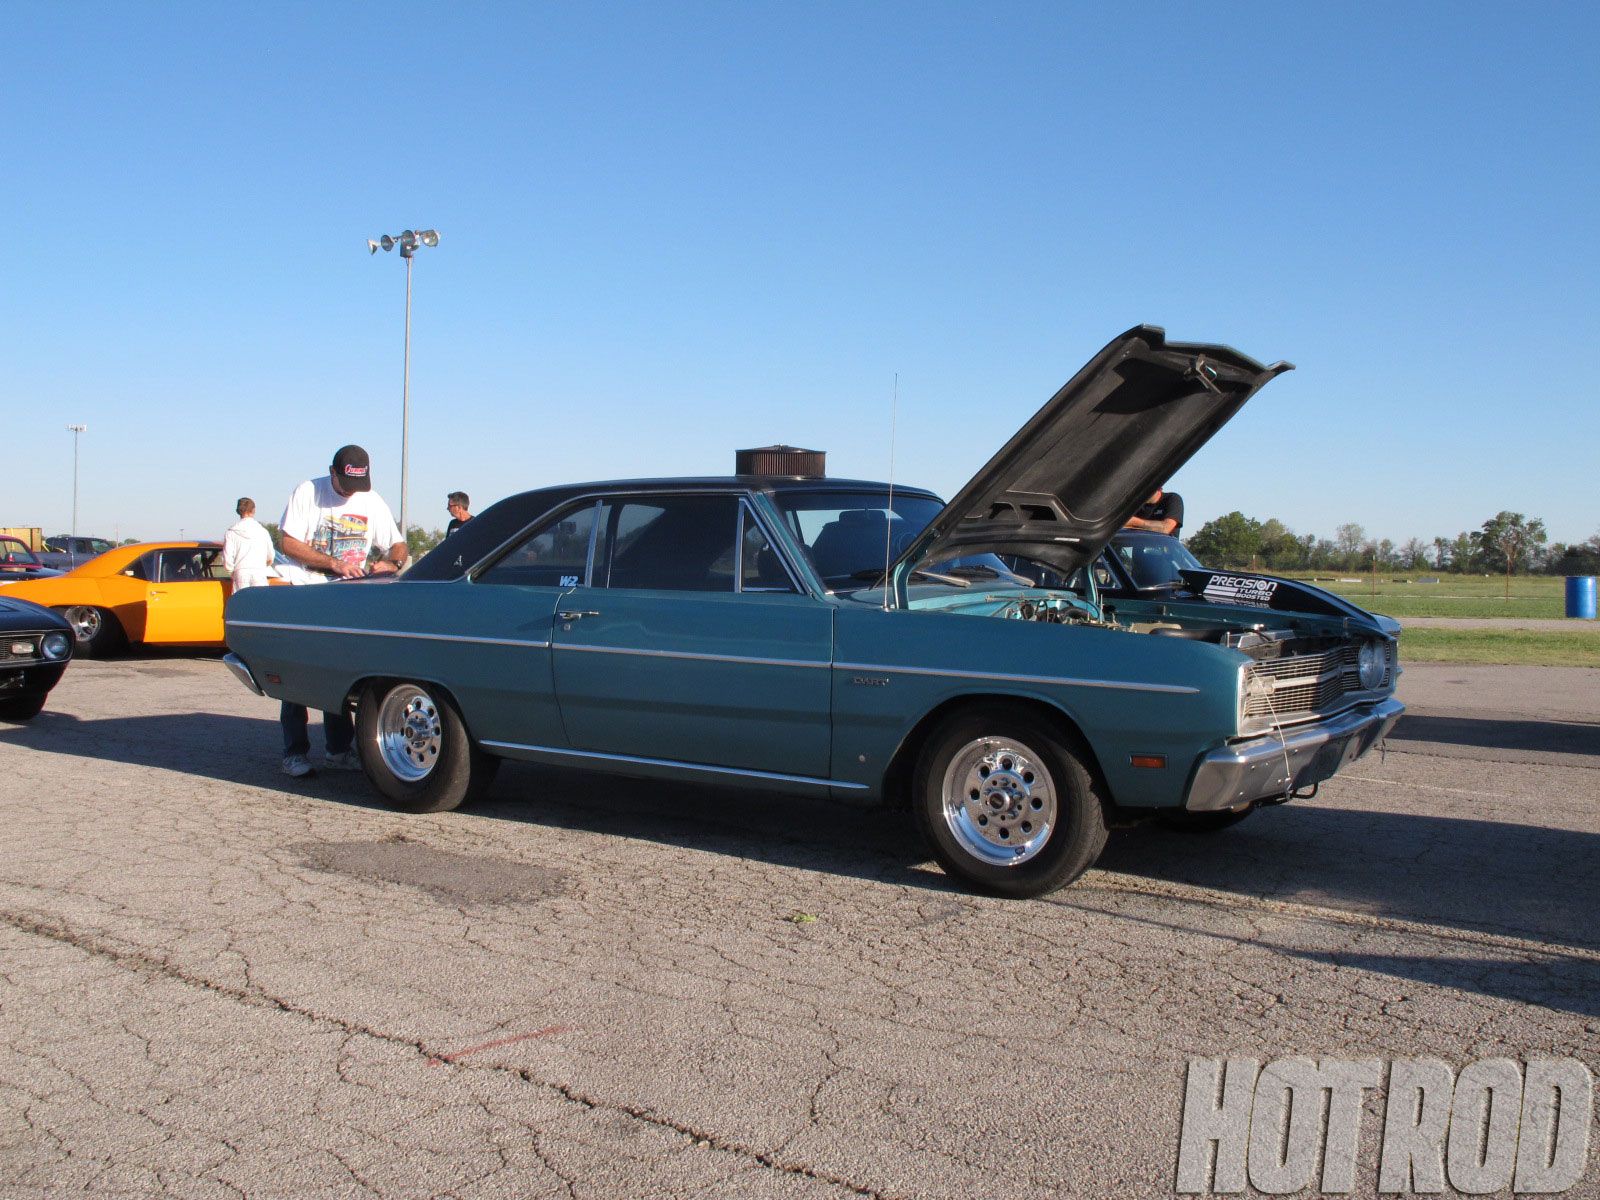 Attached picture 7404942-hrdp-1209w-2012-drag-week-tech-day-1114.jpg